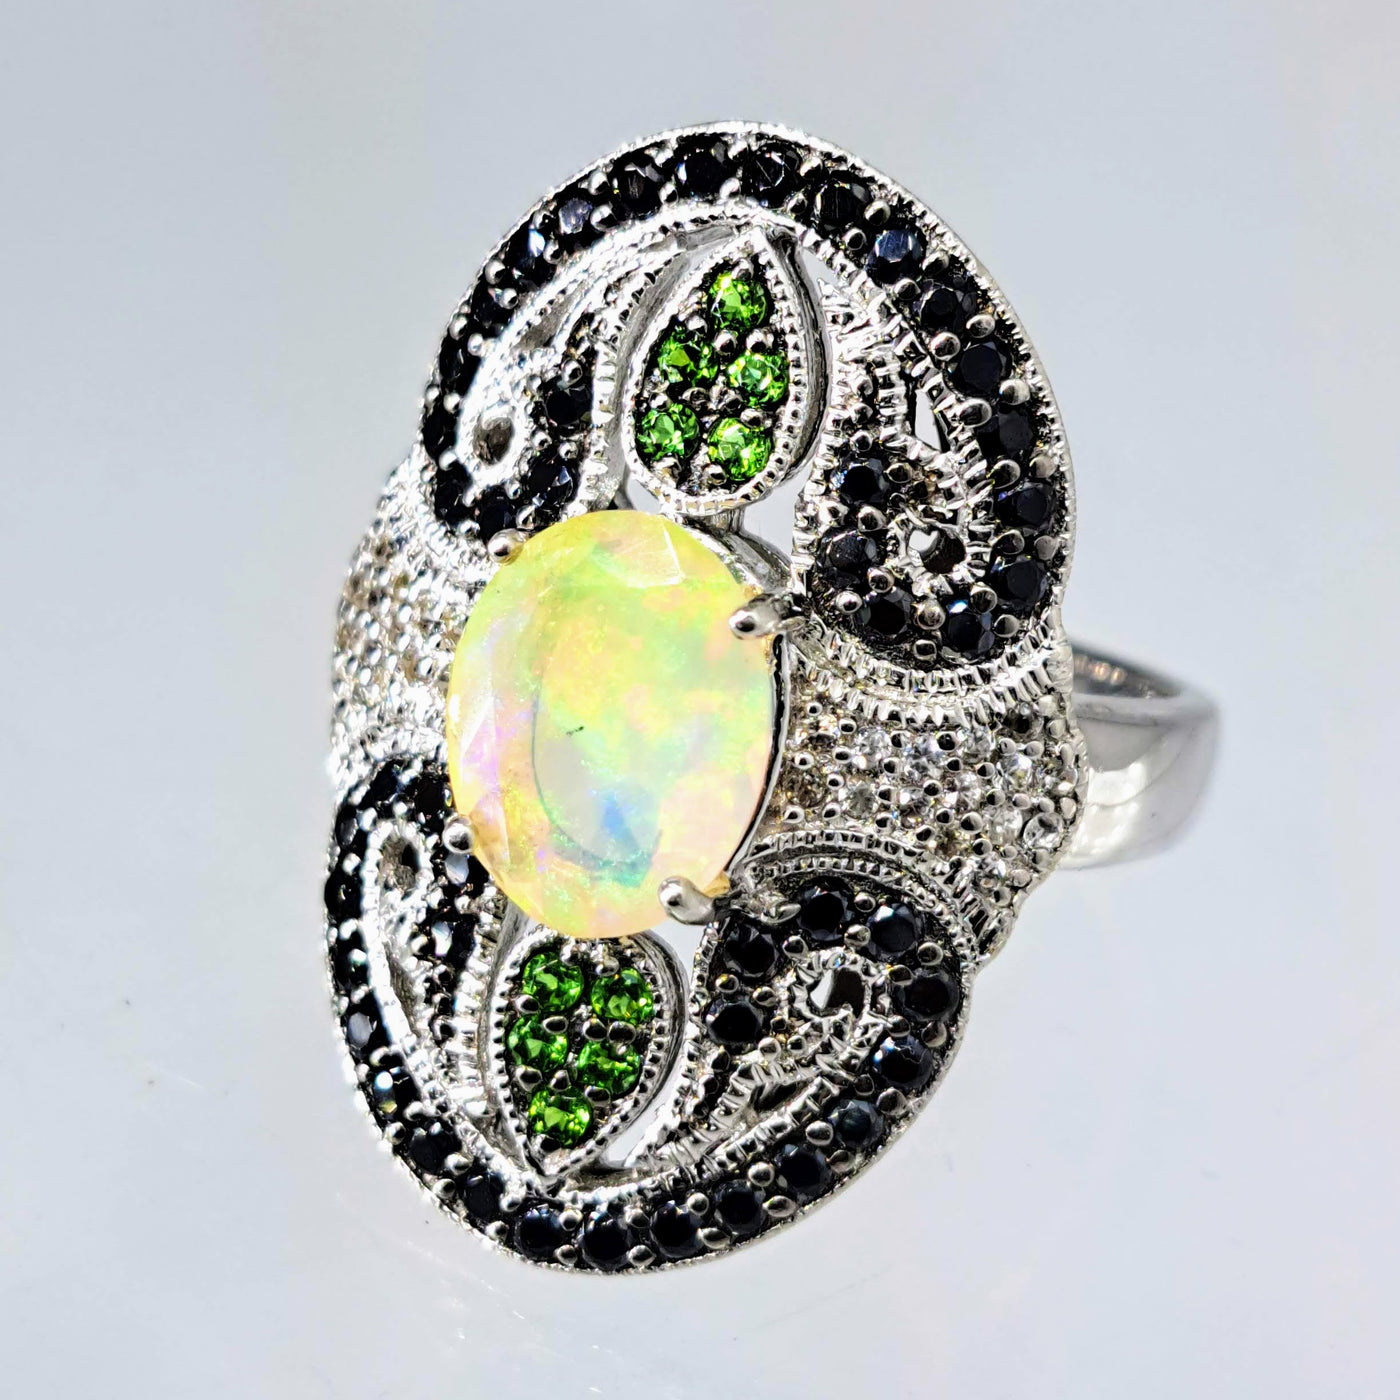 "Aunt Opal's Art Deco Revival" Sz 8 Ring - Opal, Sapphire, Chrome Diopside, Anti-tarnish Sterling